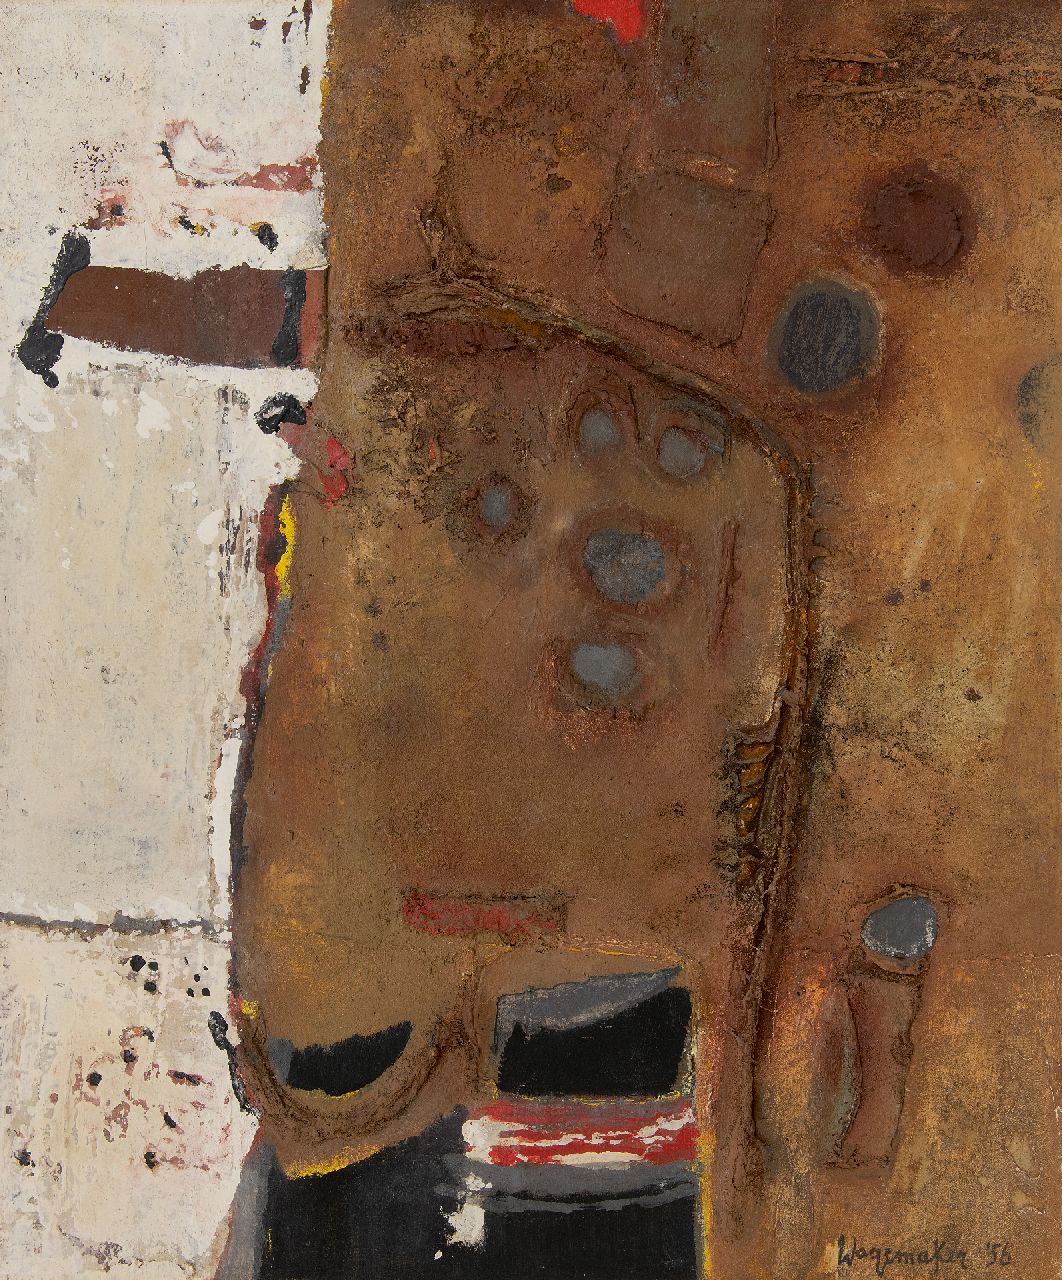 Wagemaker A.B.  | Adriaan Barend 'Jaap' Wagemaker | Paintings offered for sale | Spaanse aarde (Spanish earth), mixed media on canvas 65.3 x 55.5 cm, signed l.r. and dated '56